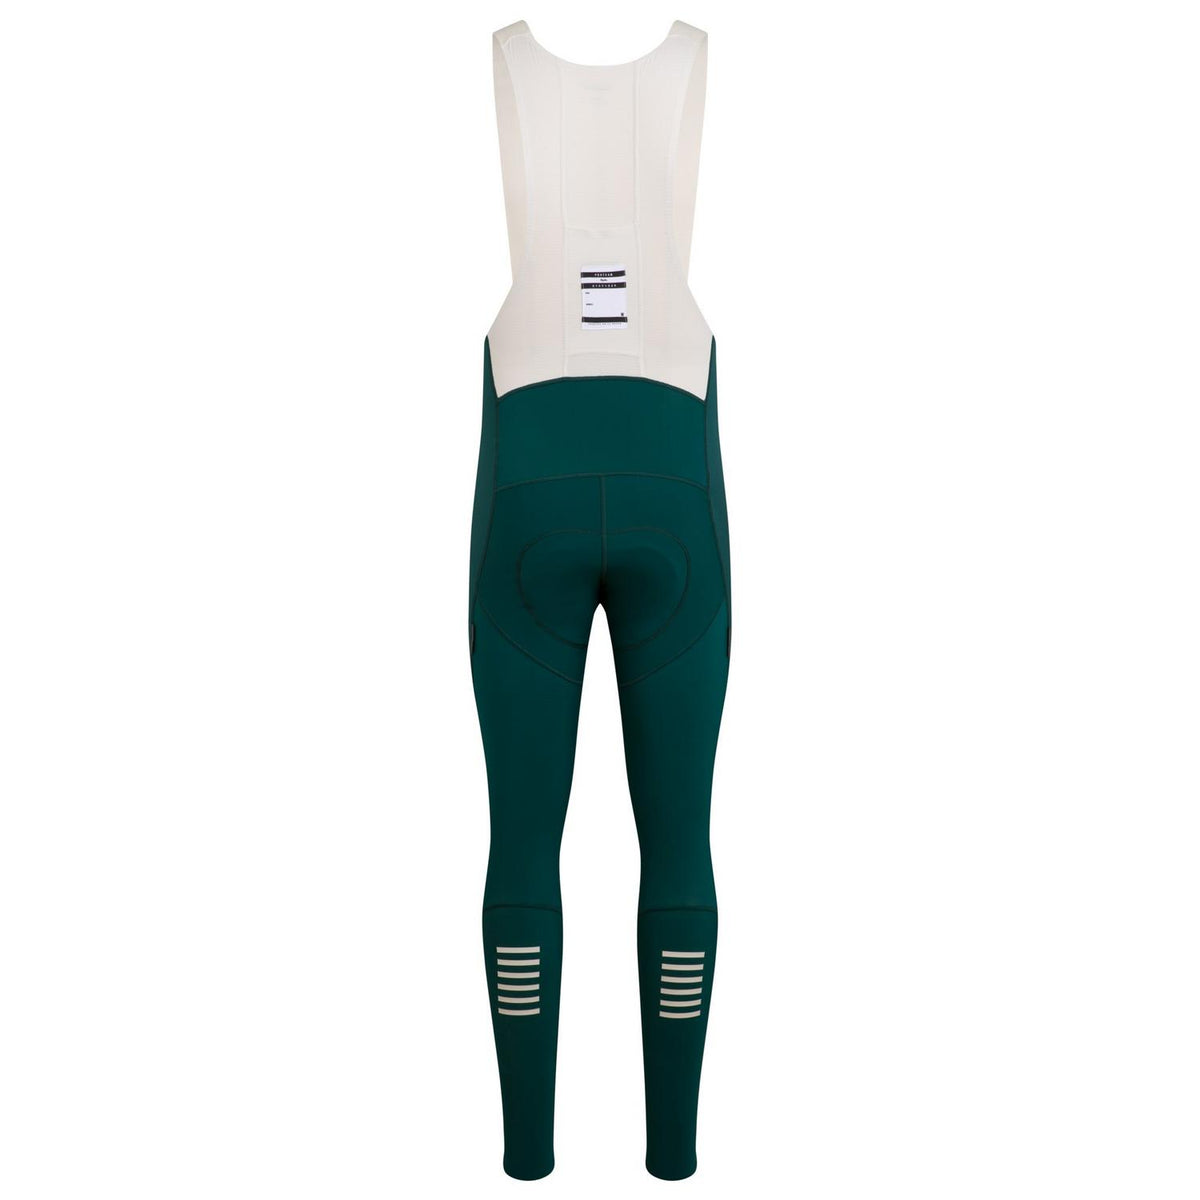 Women's Pro Team Winter Tights, Cycling Tights For Riding In Cold Weather